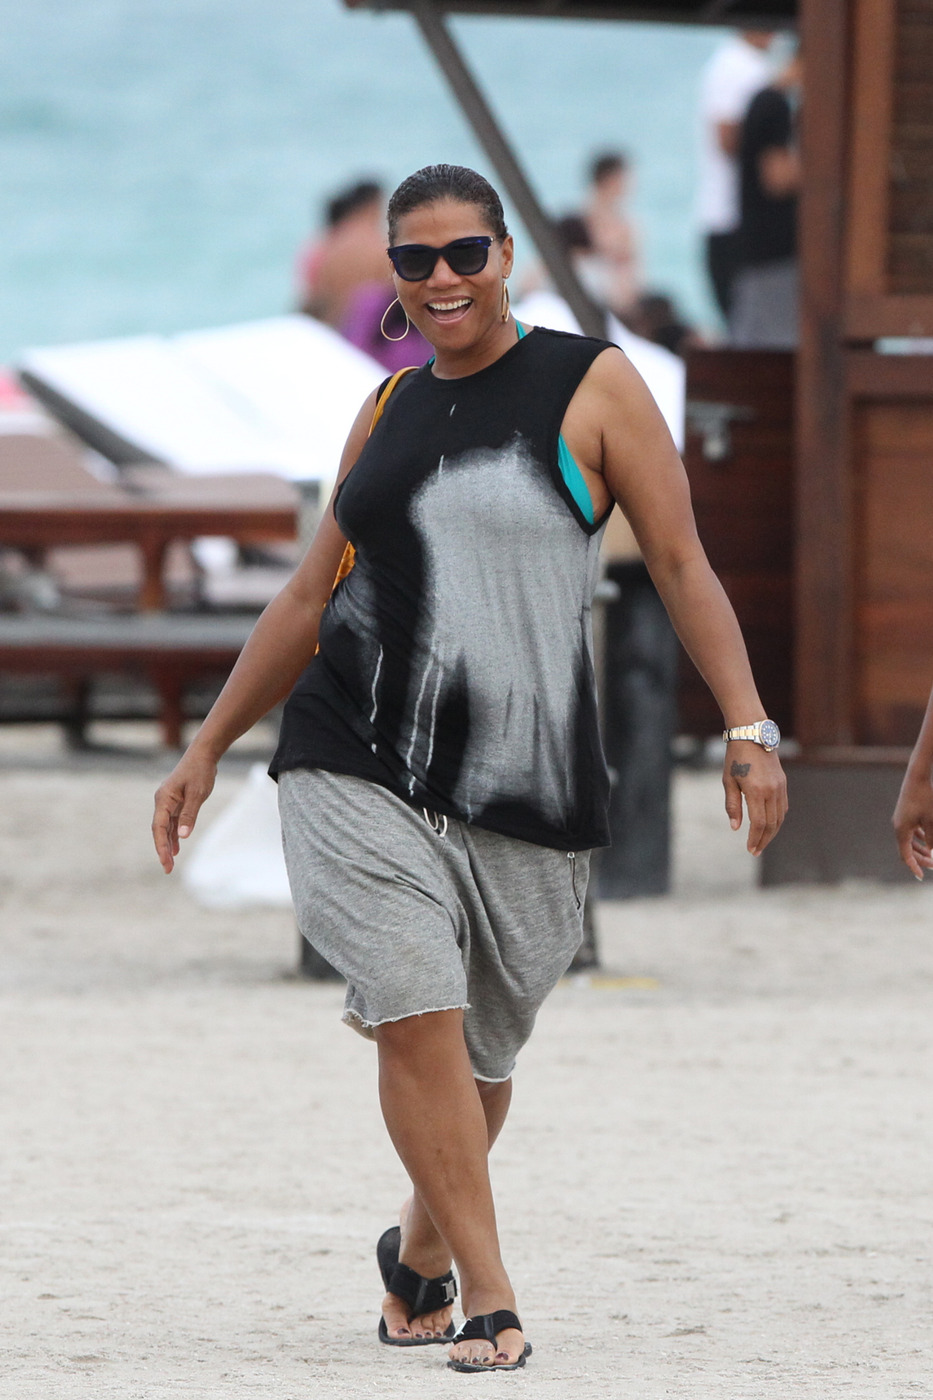 Queen Latifah enjoys a day at the beach with her friends in Miami